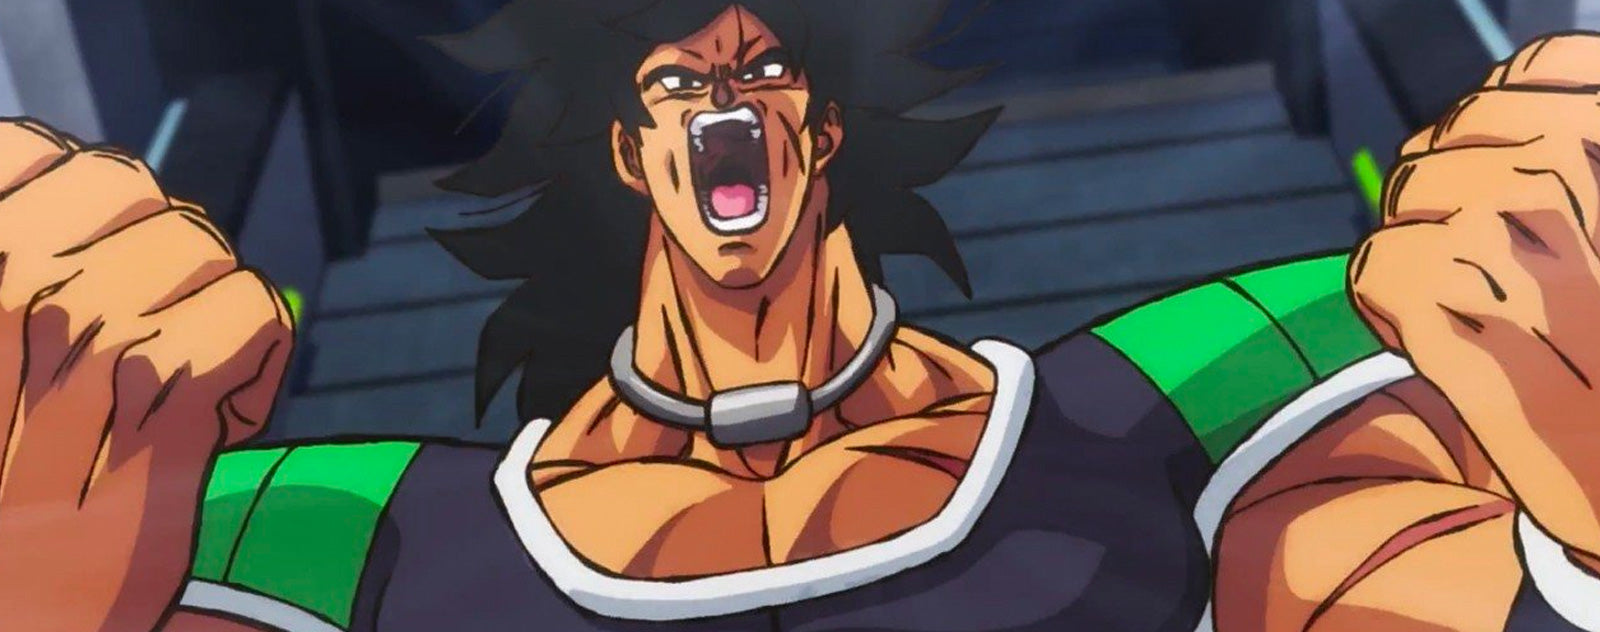 Broly Normal form